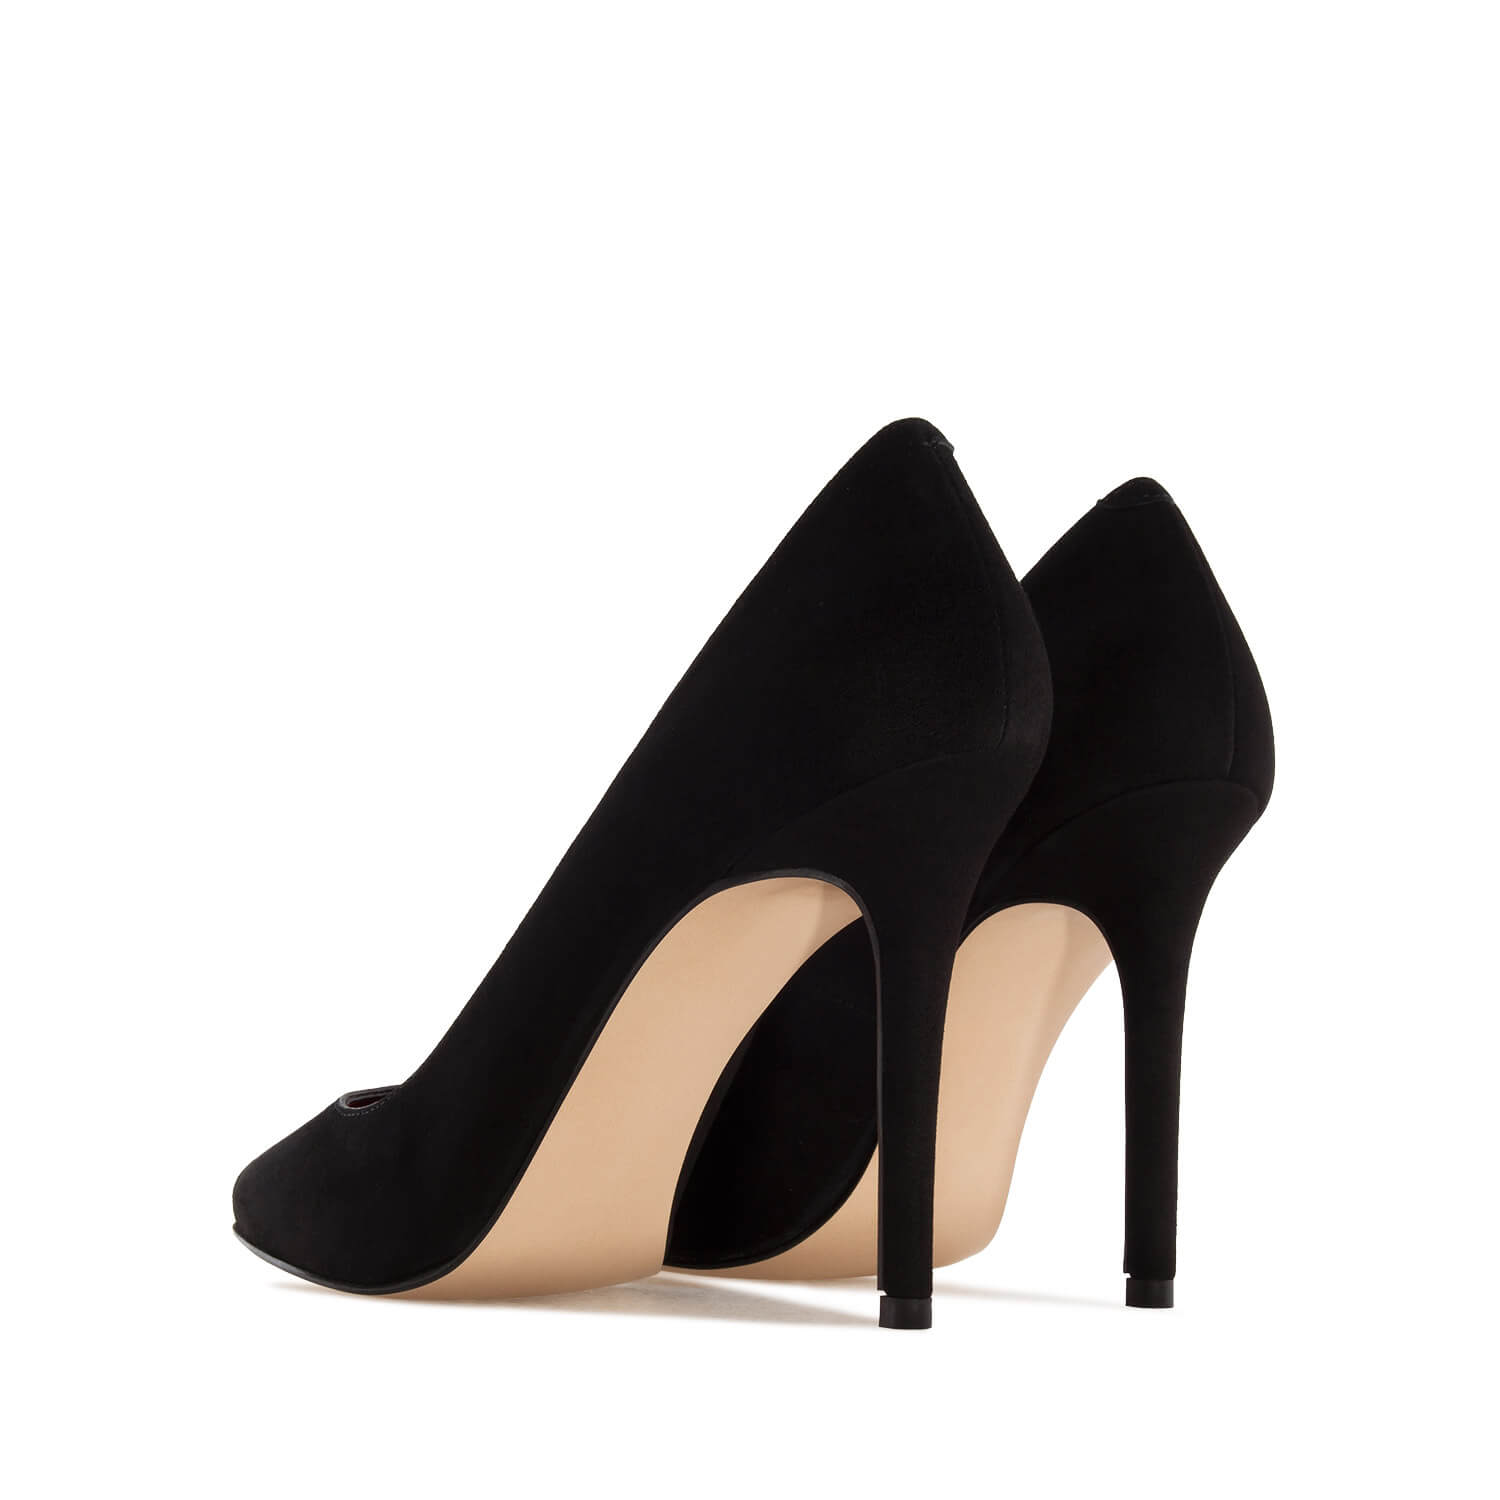 Heeled Shoes in Black Suede 